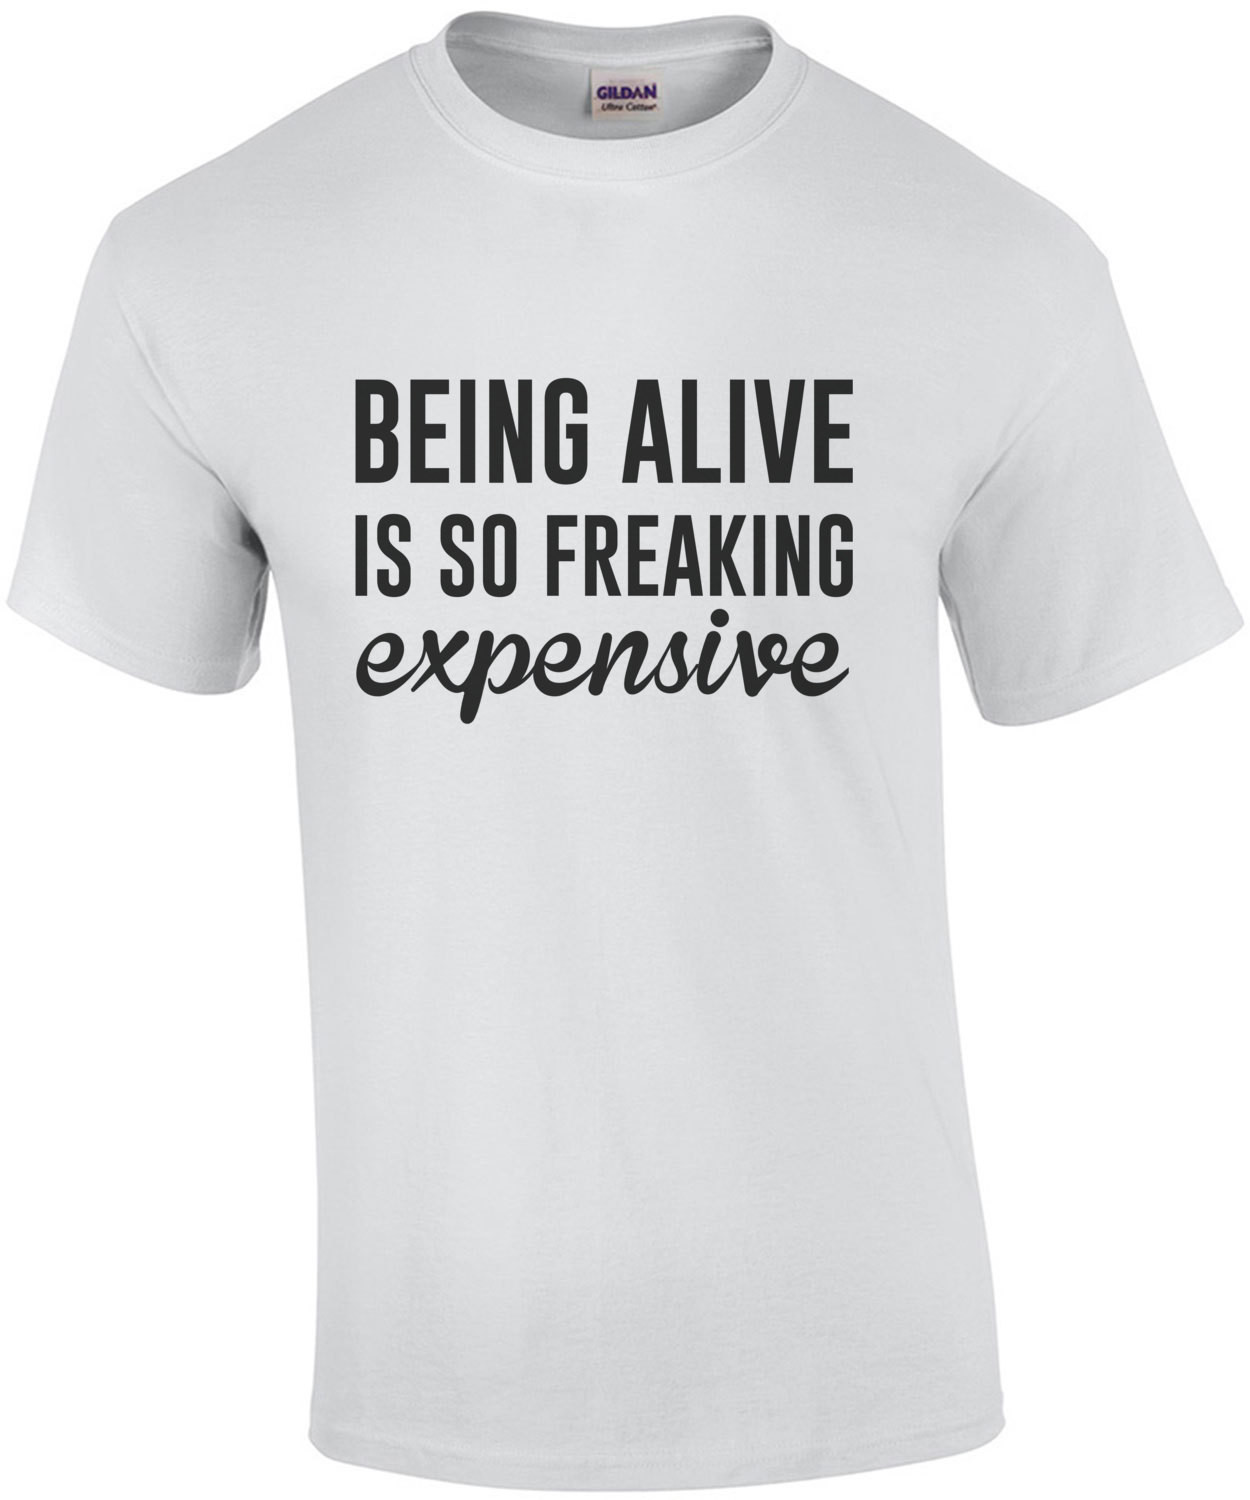 Being Alive is so freaking expensive - funny sarcastic t-shirt